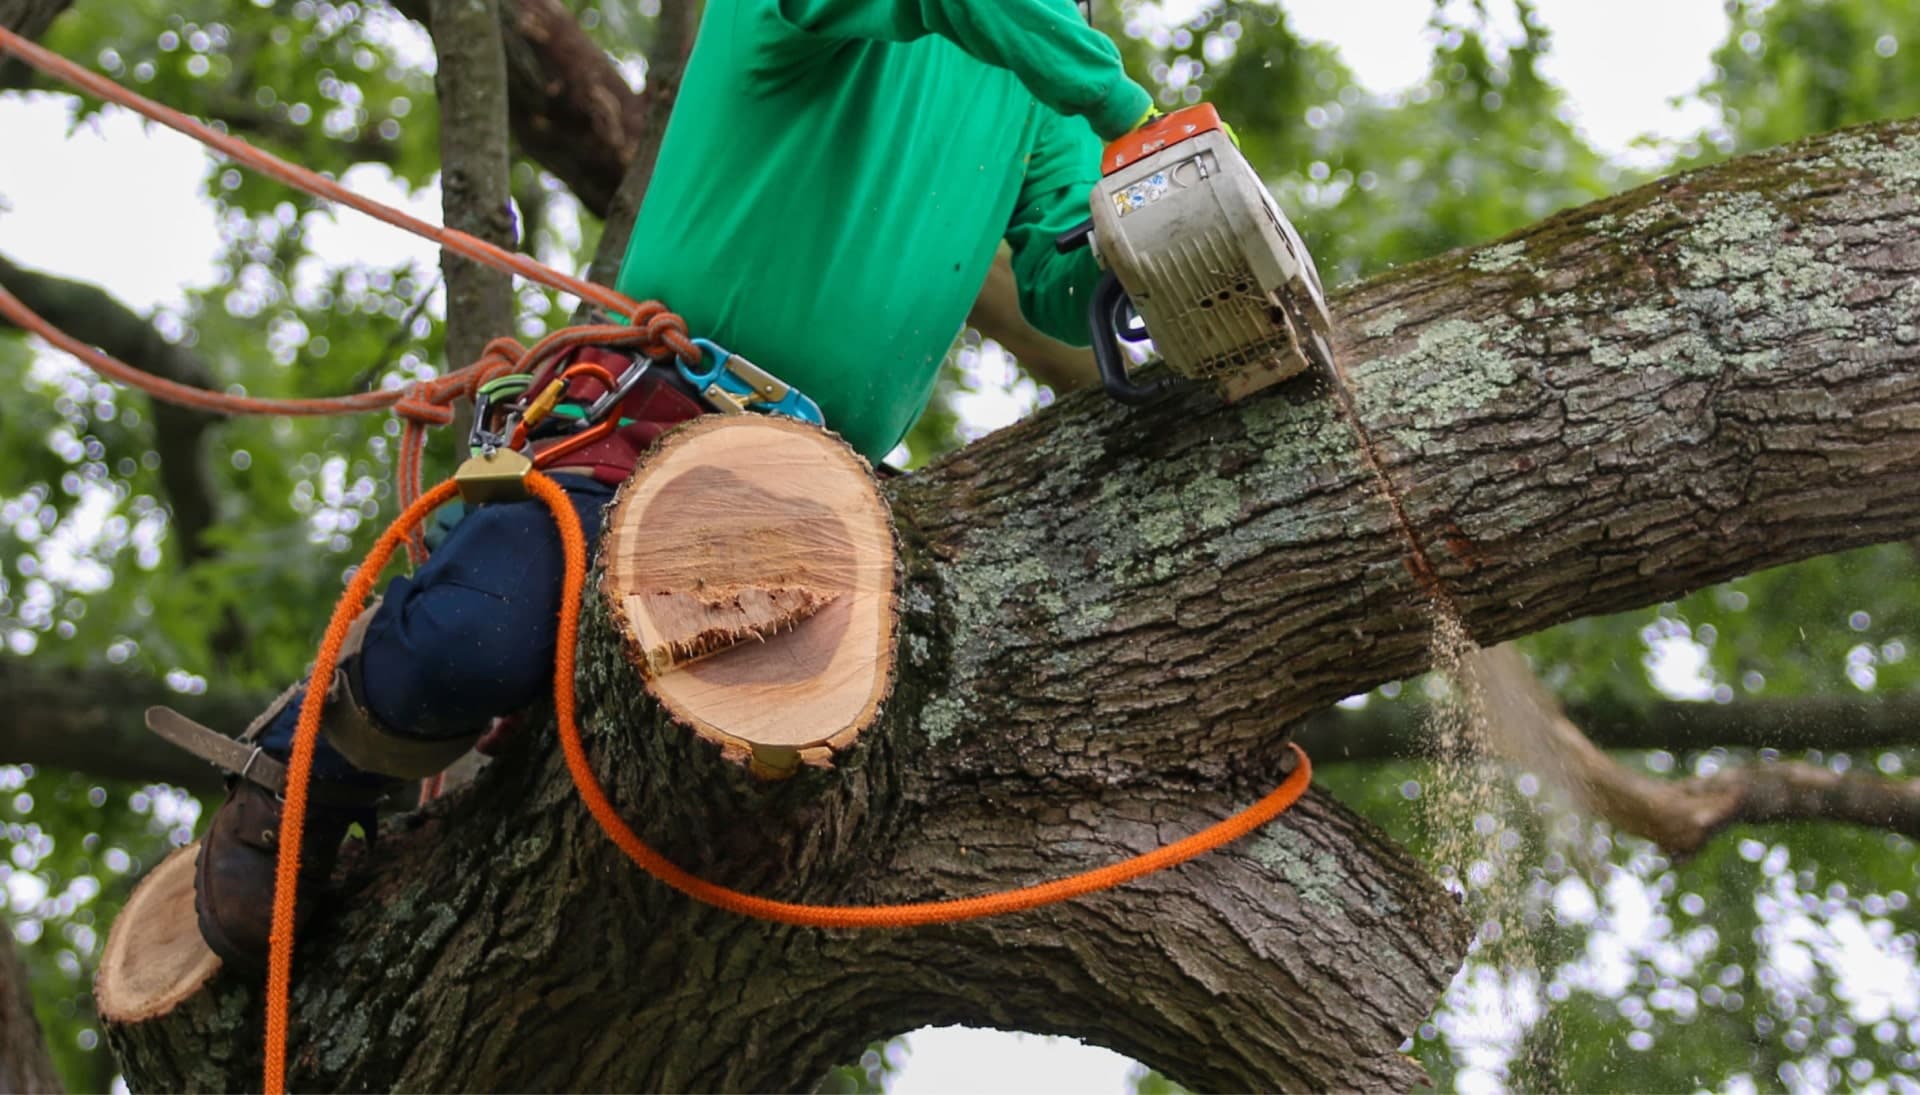 Shed your worries away with best tree removal in Georgetown